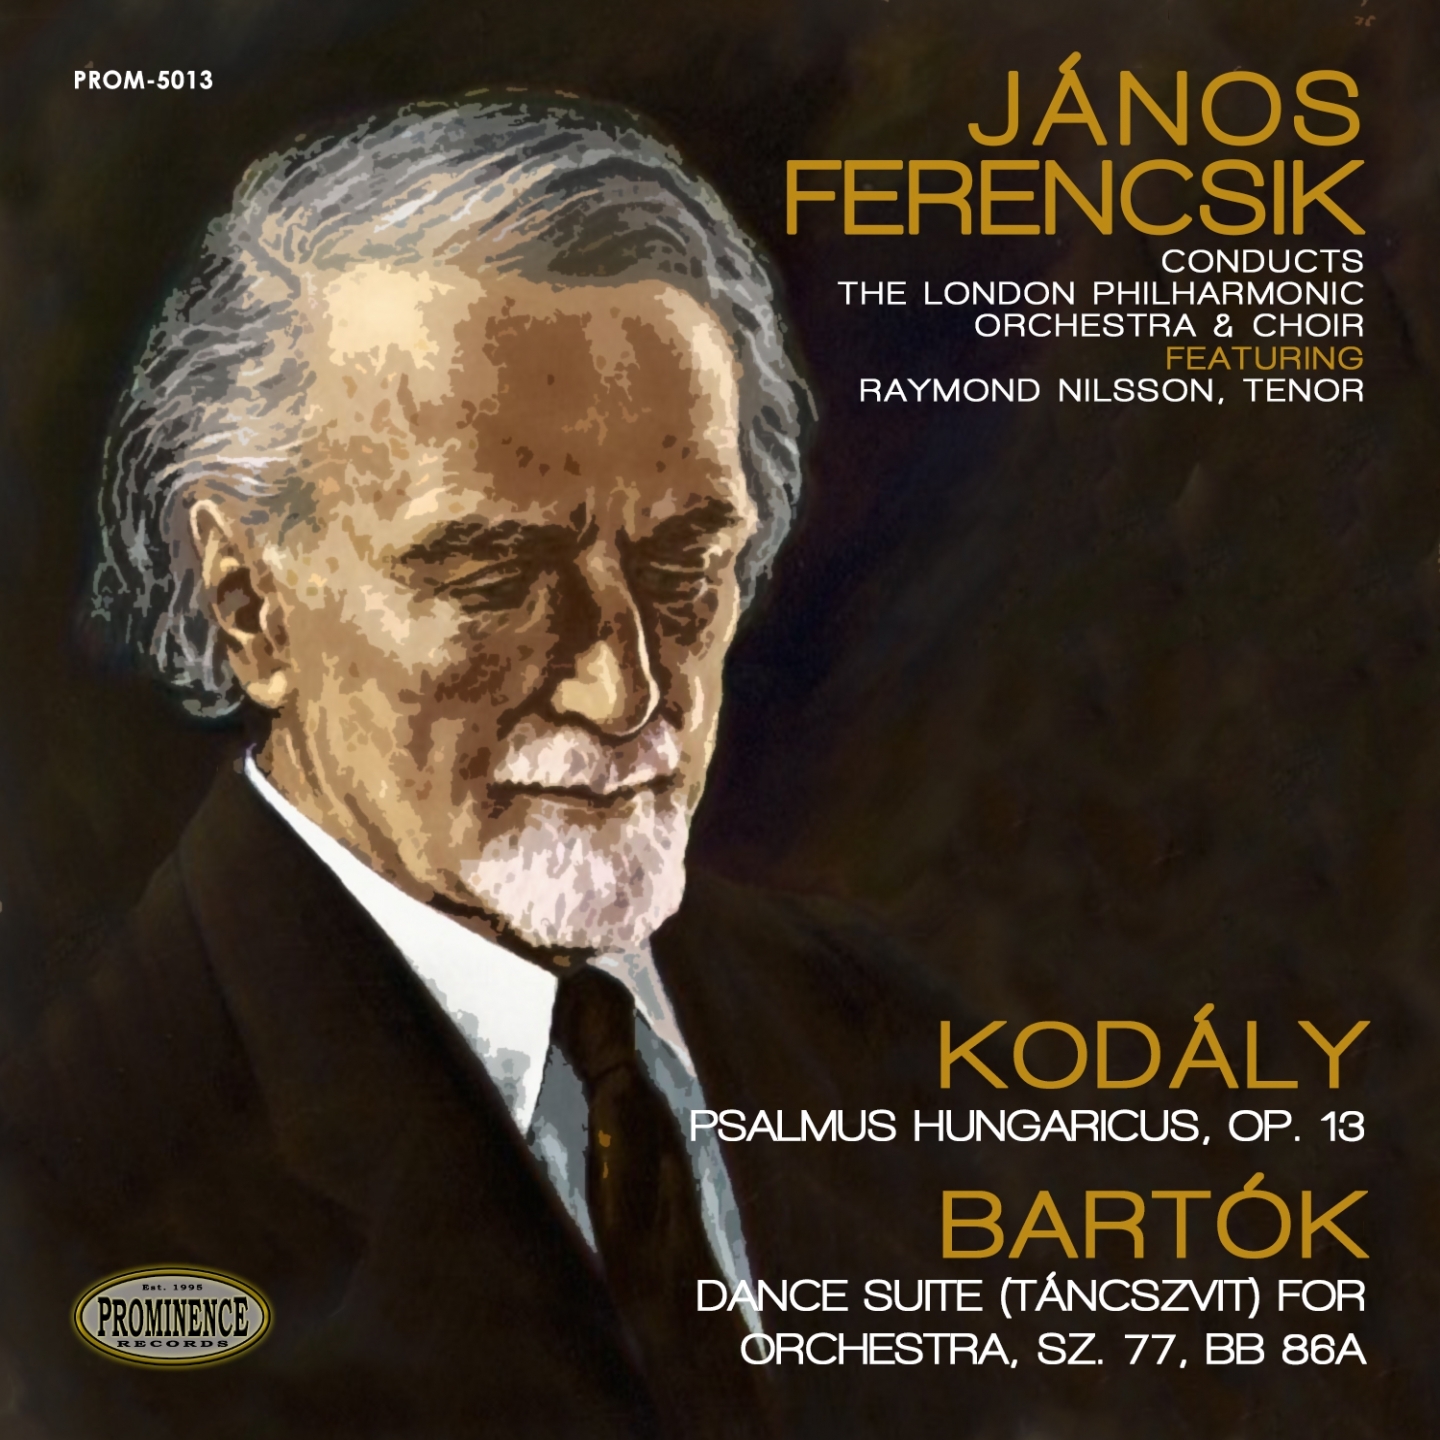 Koda ly: Psalmus Hungaricus, Op. 13  Barto k: Dance Suite for Orchestra